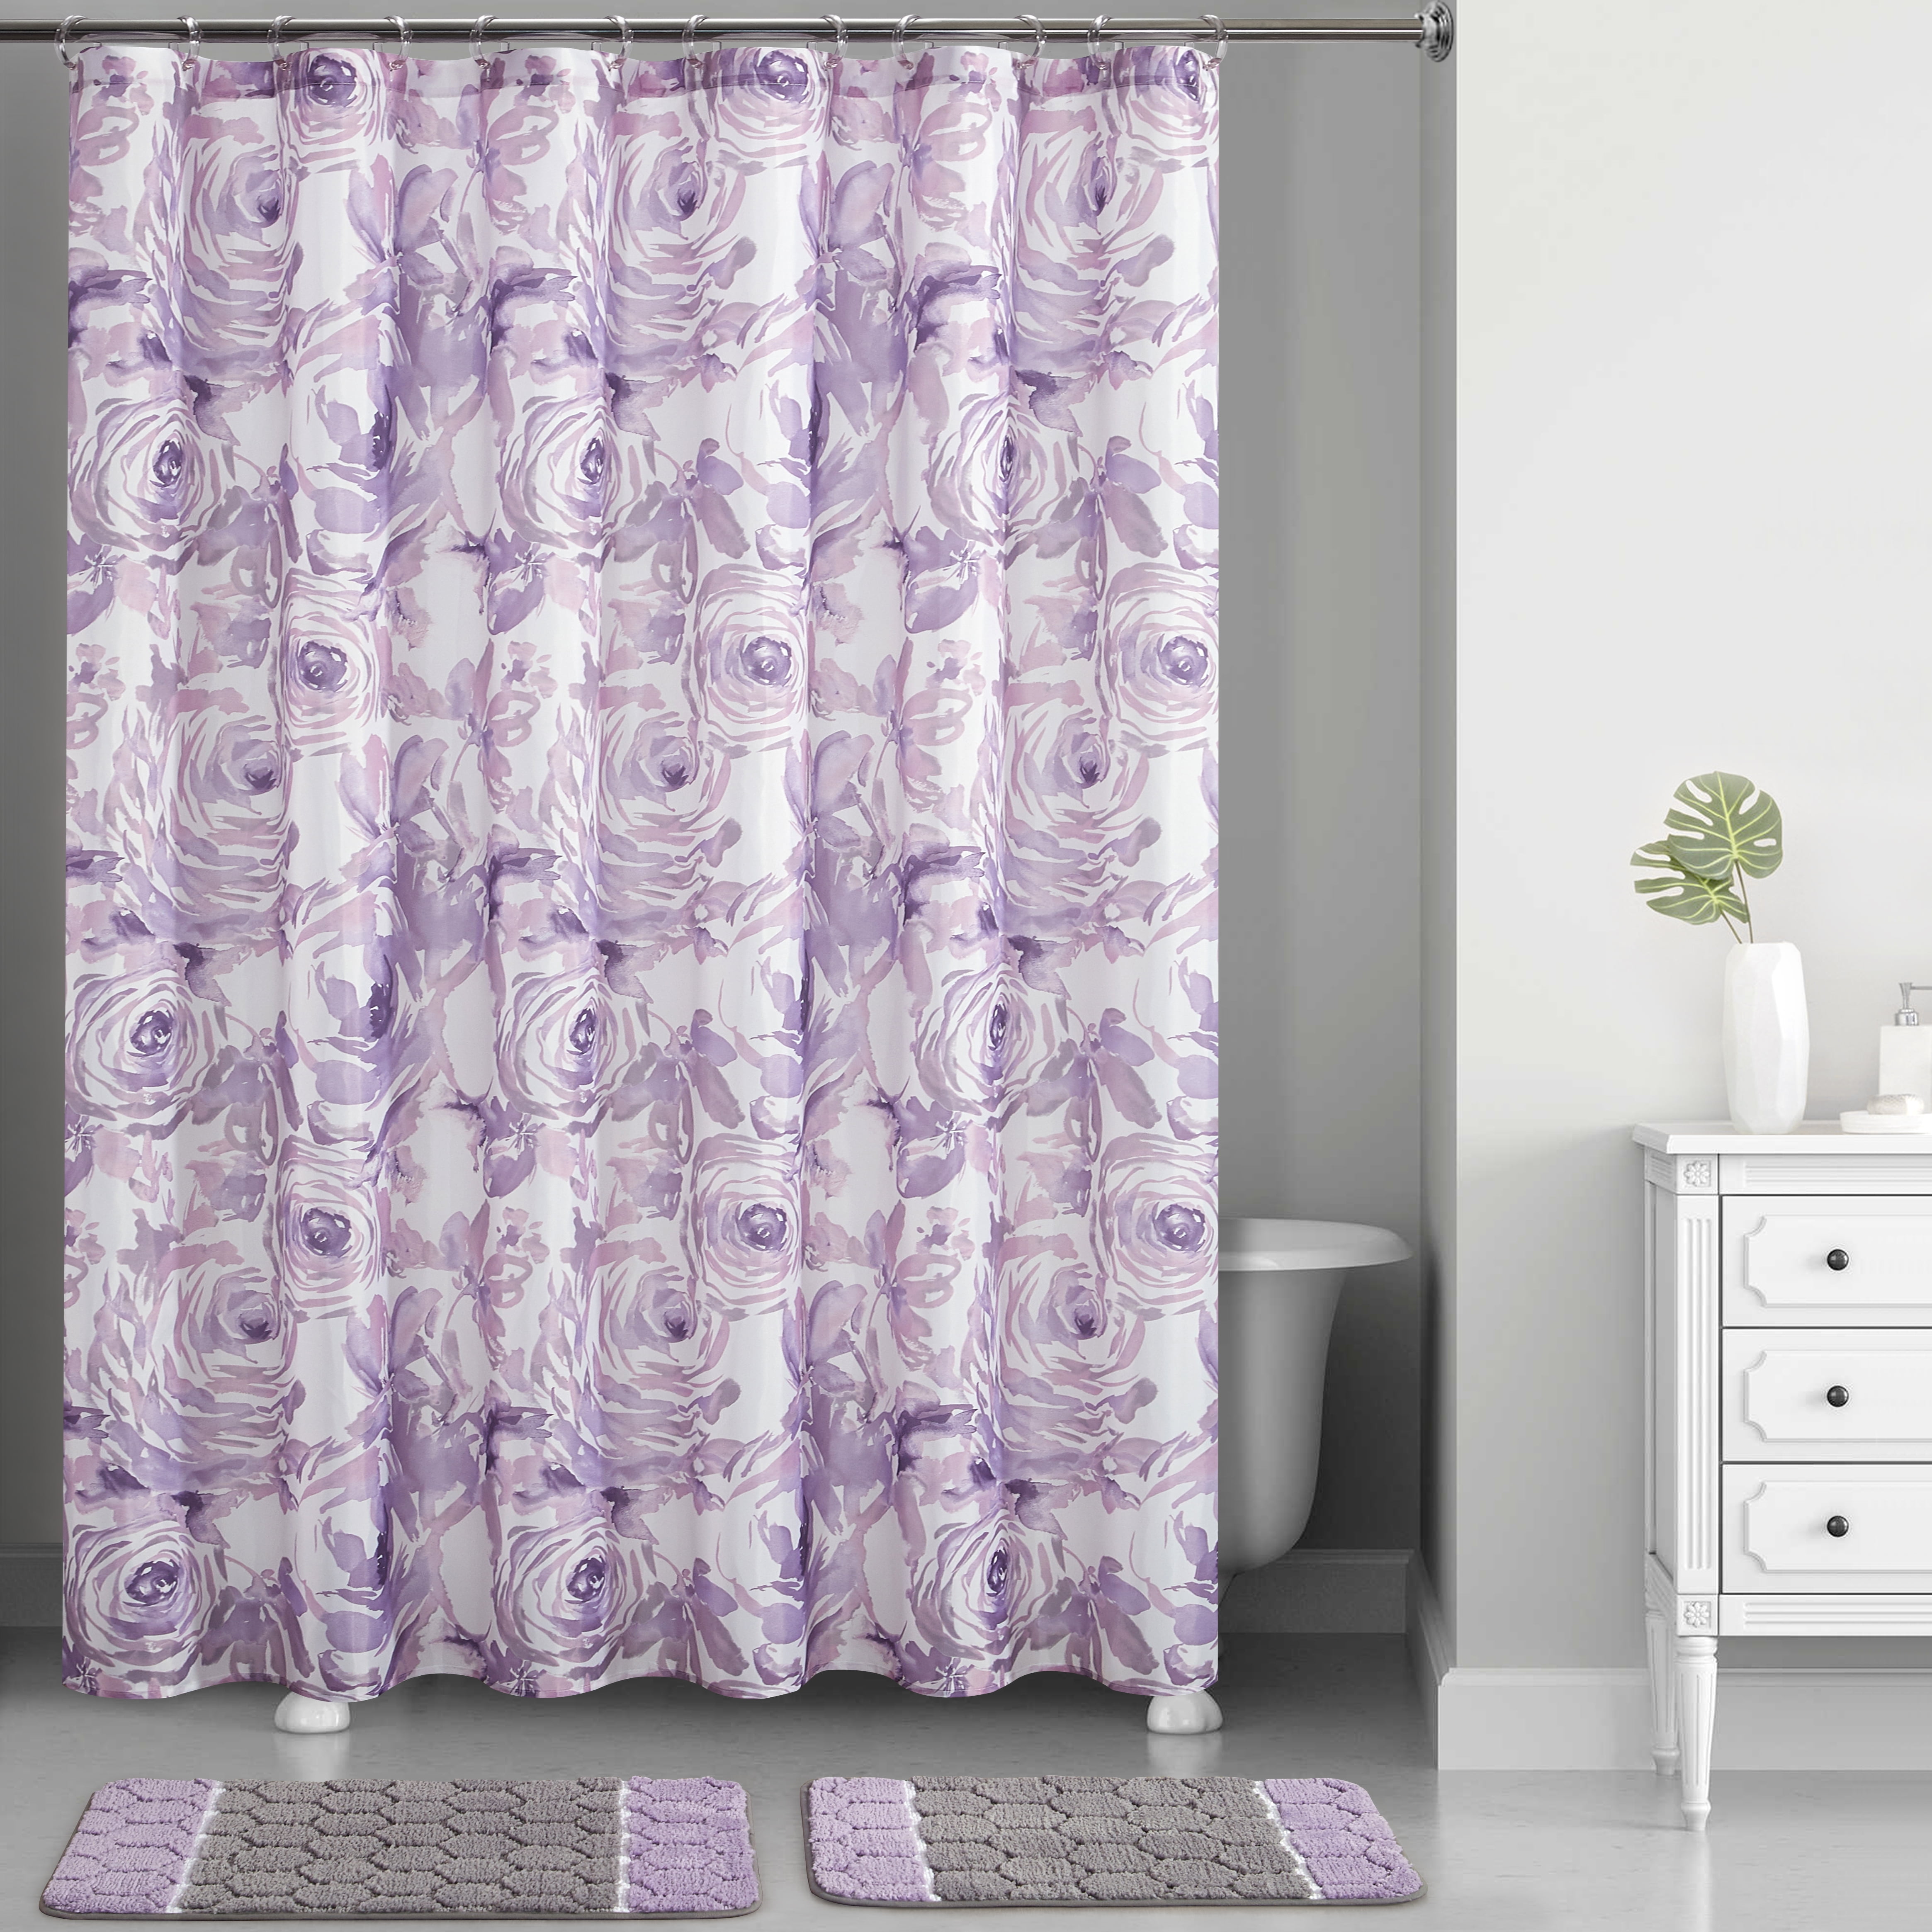 Details about   DKNY TATE  Floral Fabric Shower Curtain Watercolor Beige Lavender Linen NEW 